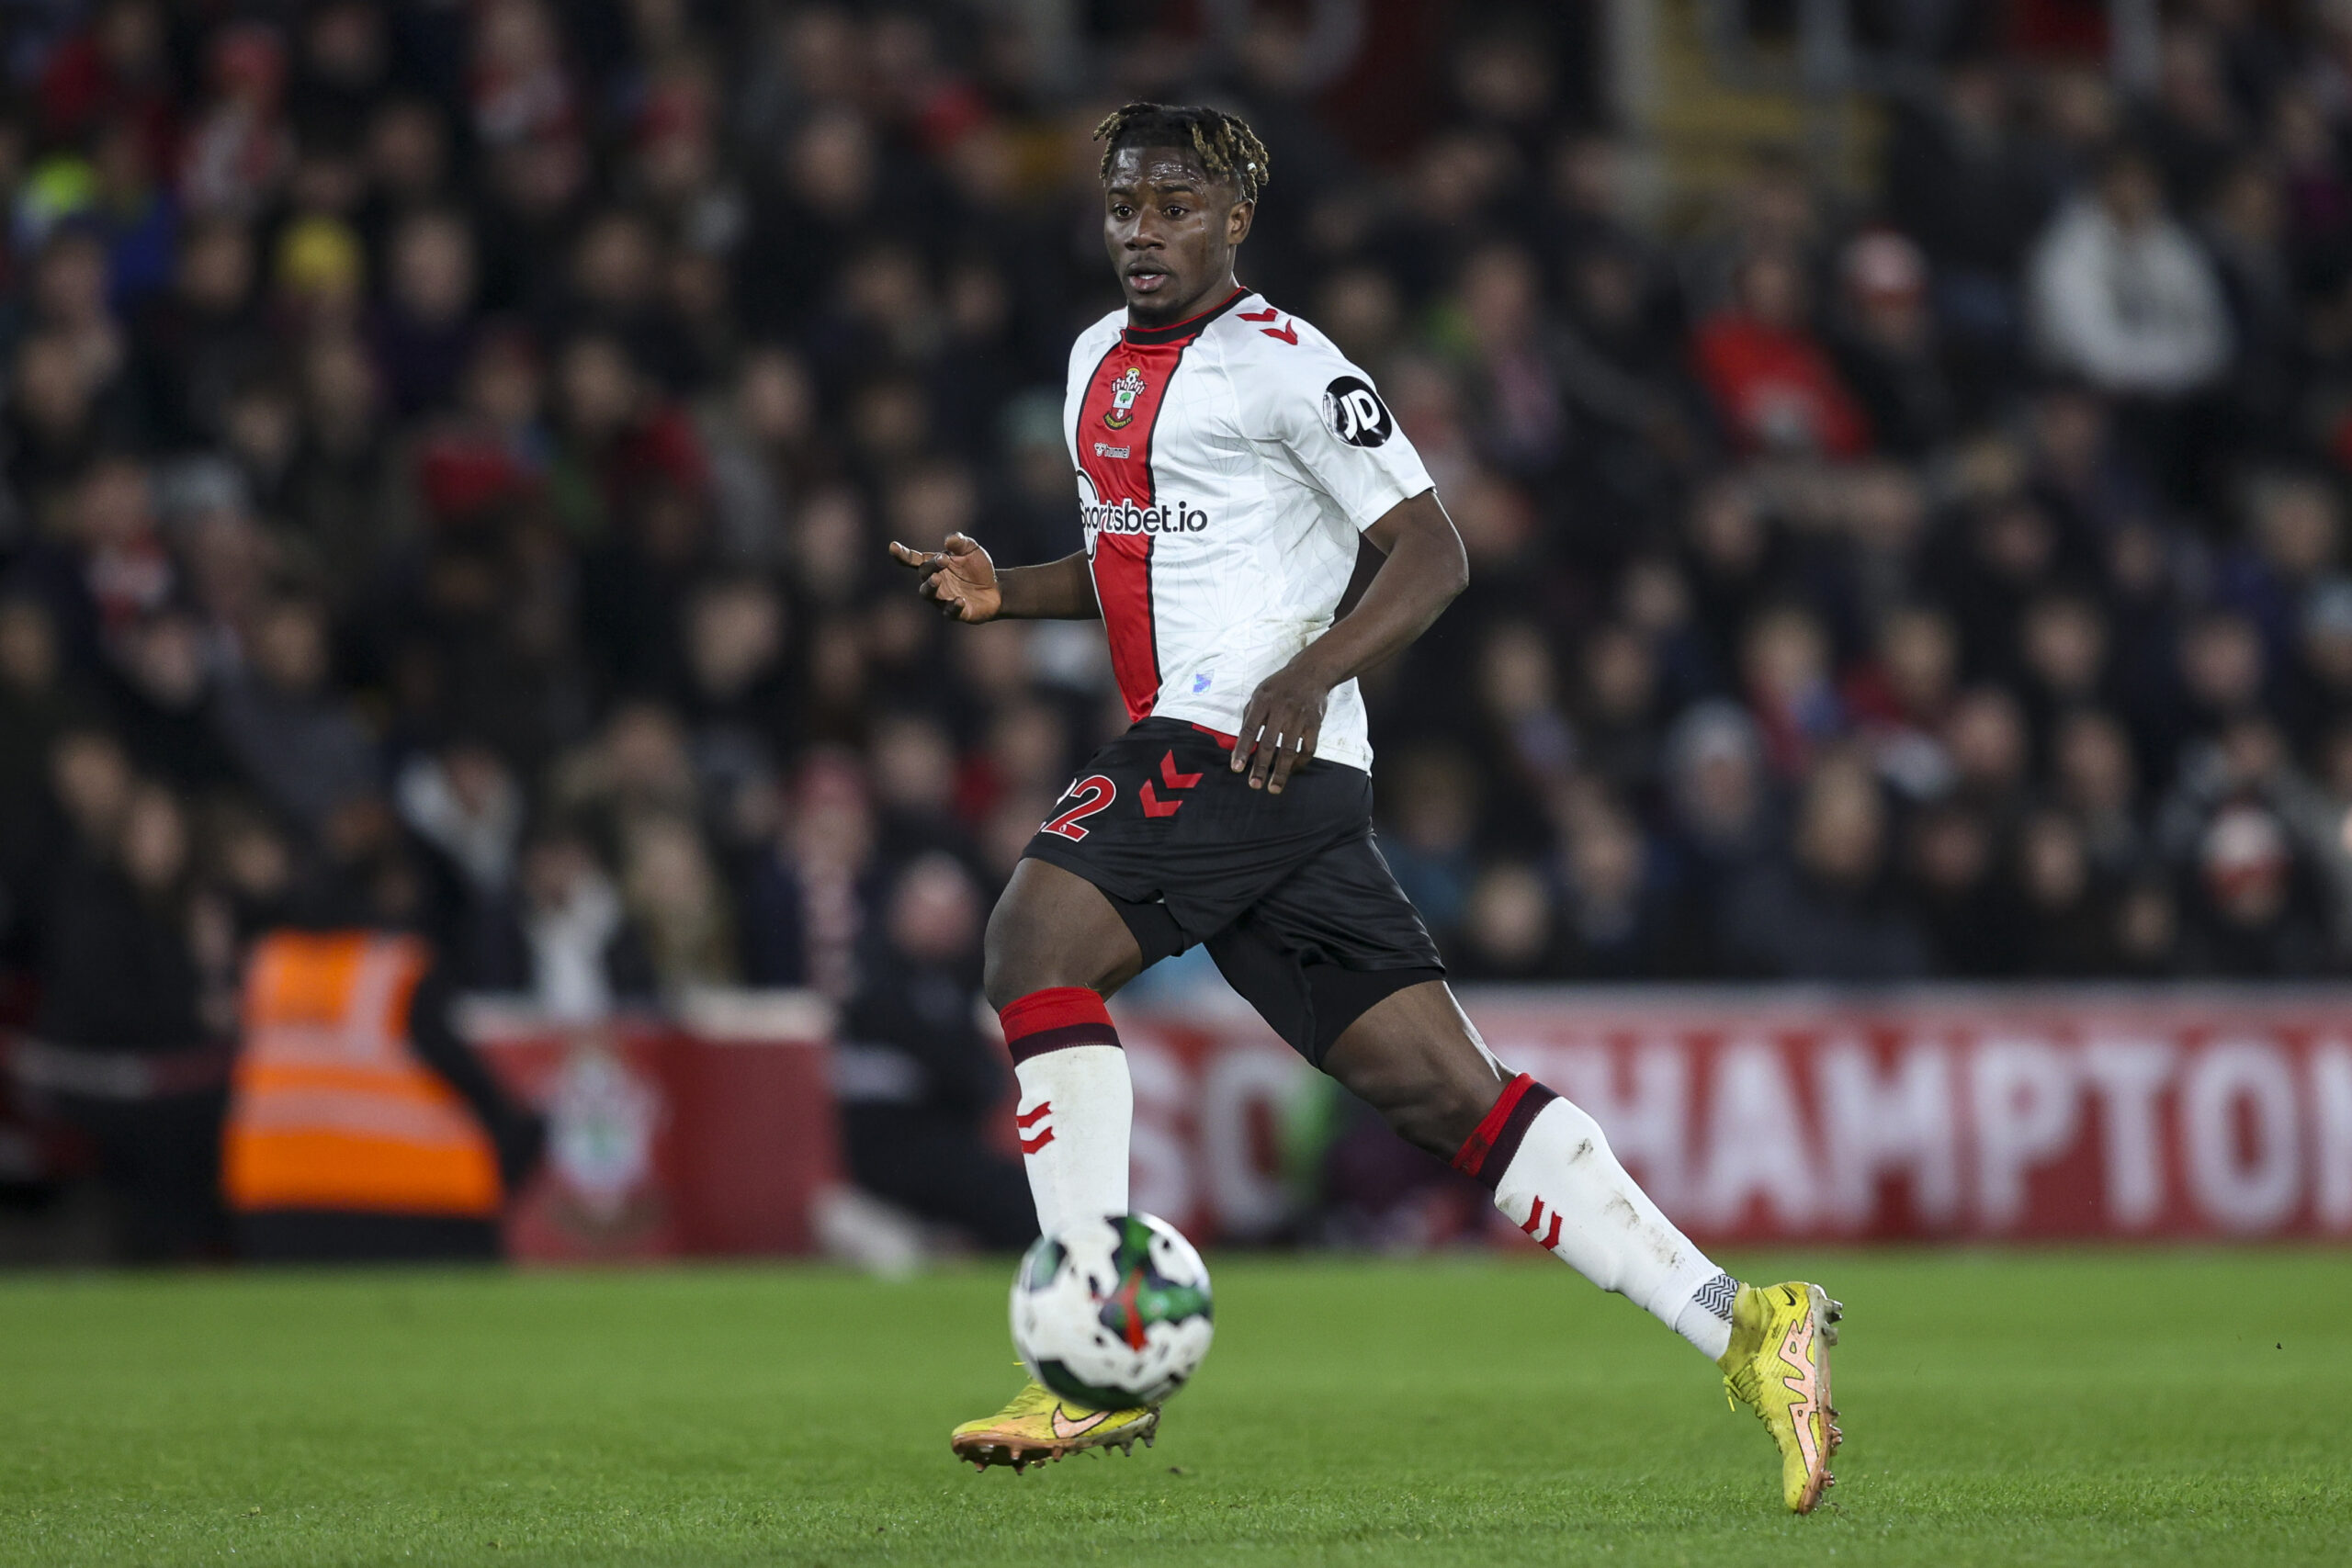 SOUTHAMPTON, ENGLAND - JANUARY 11: Mohammed Salisu of Southampton during the Carabao Cup Quarter Final match between Southampton v Manchester City at St Mary's Stadium on January 11, 2023 in Southampton, England. (Photo by Robin Jones/Getty Images)